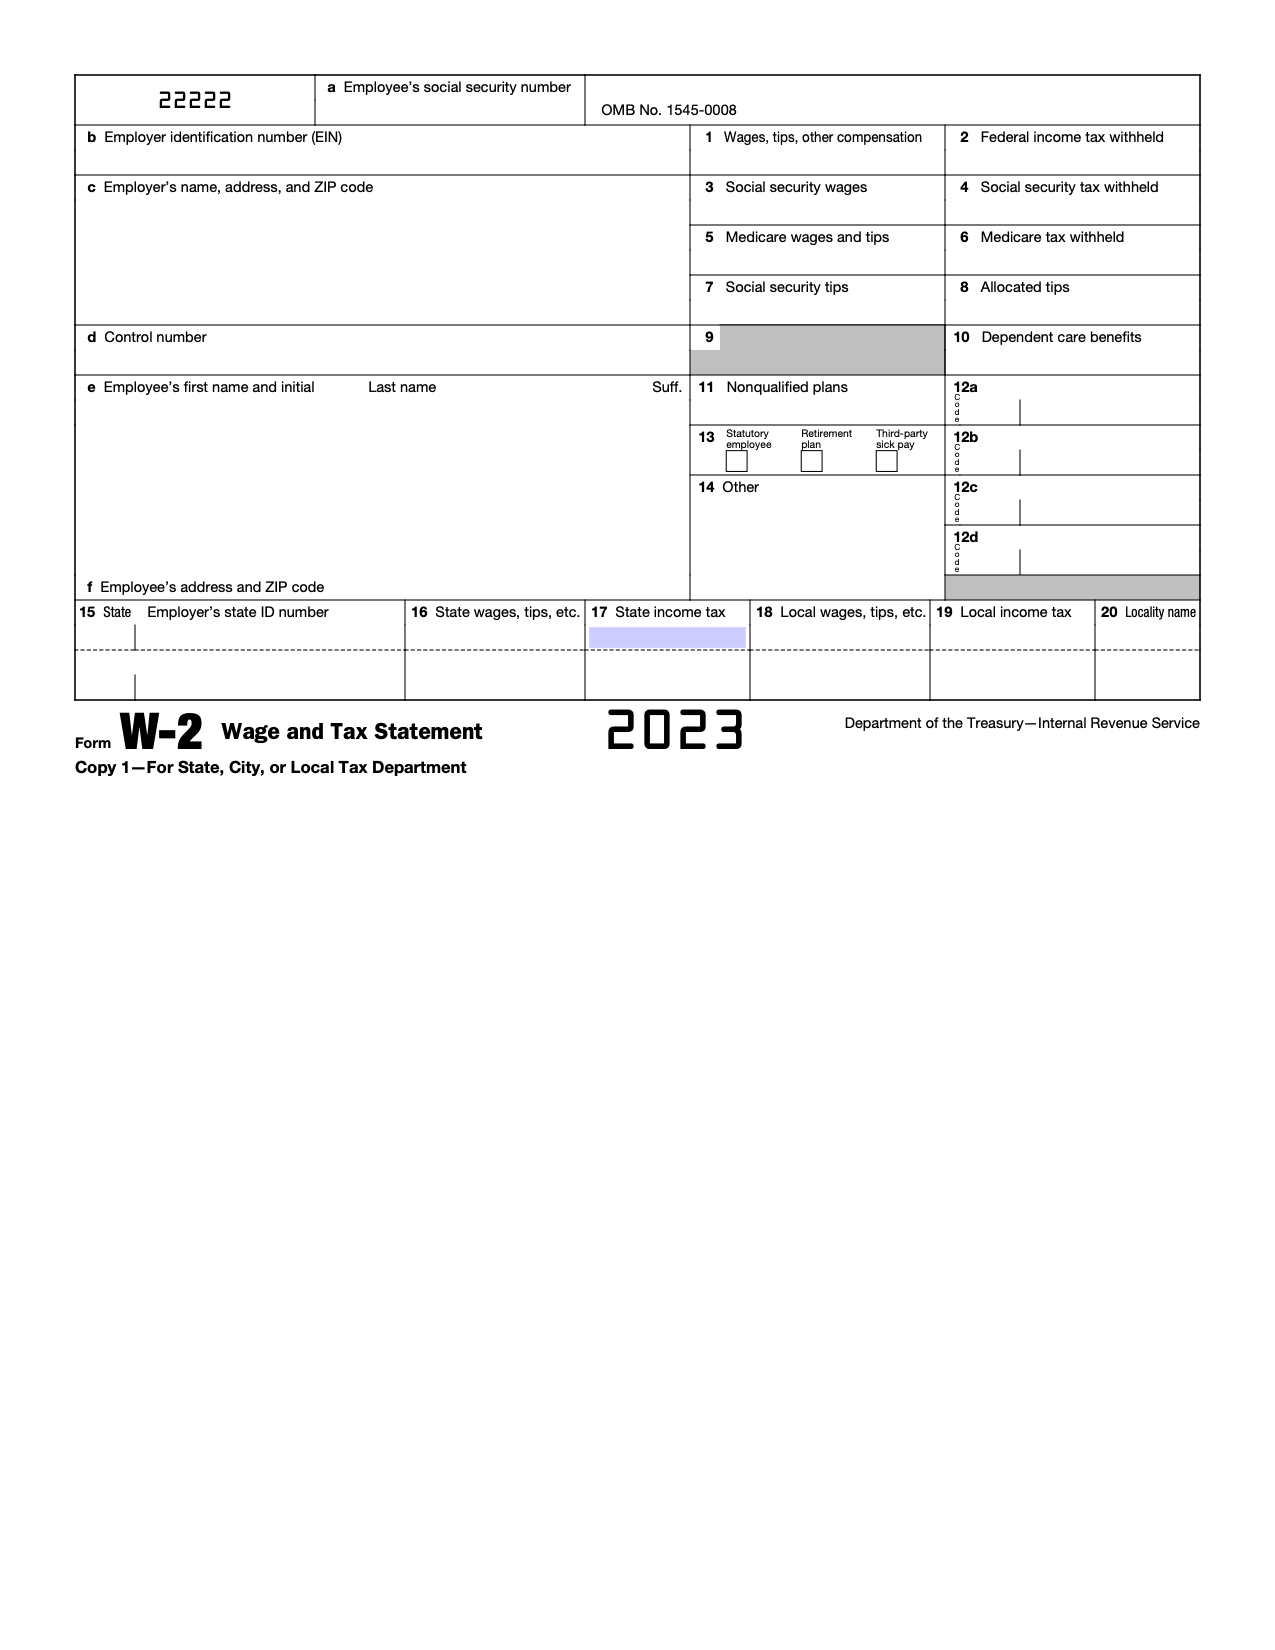 Free Irs Form W-2 | Wage And Tax Statement - Pdf – Eforms intended for W2 Form Printable 2022